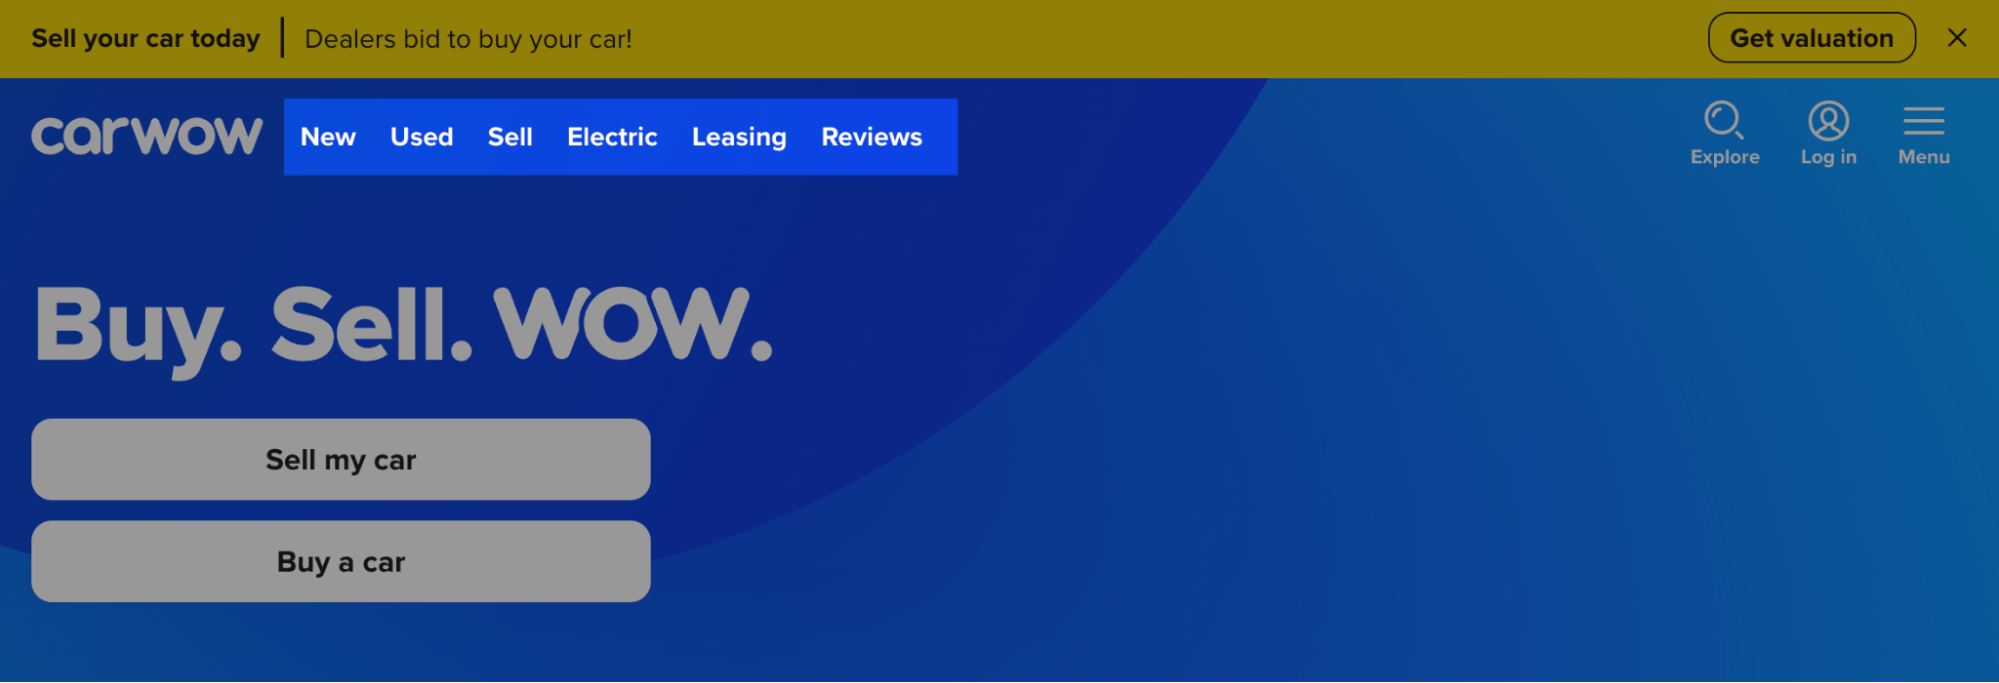 Important pages navigation-wise are linked in the upper menu on carwow's homepage